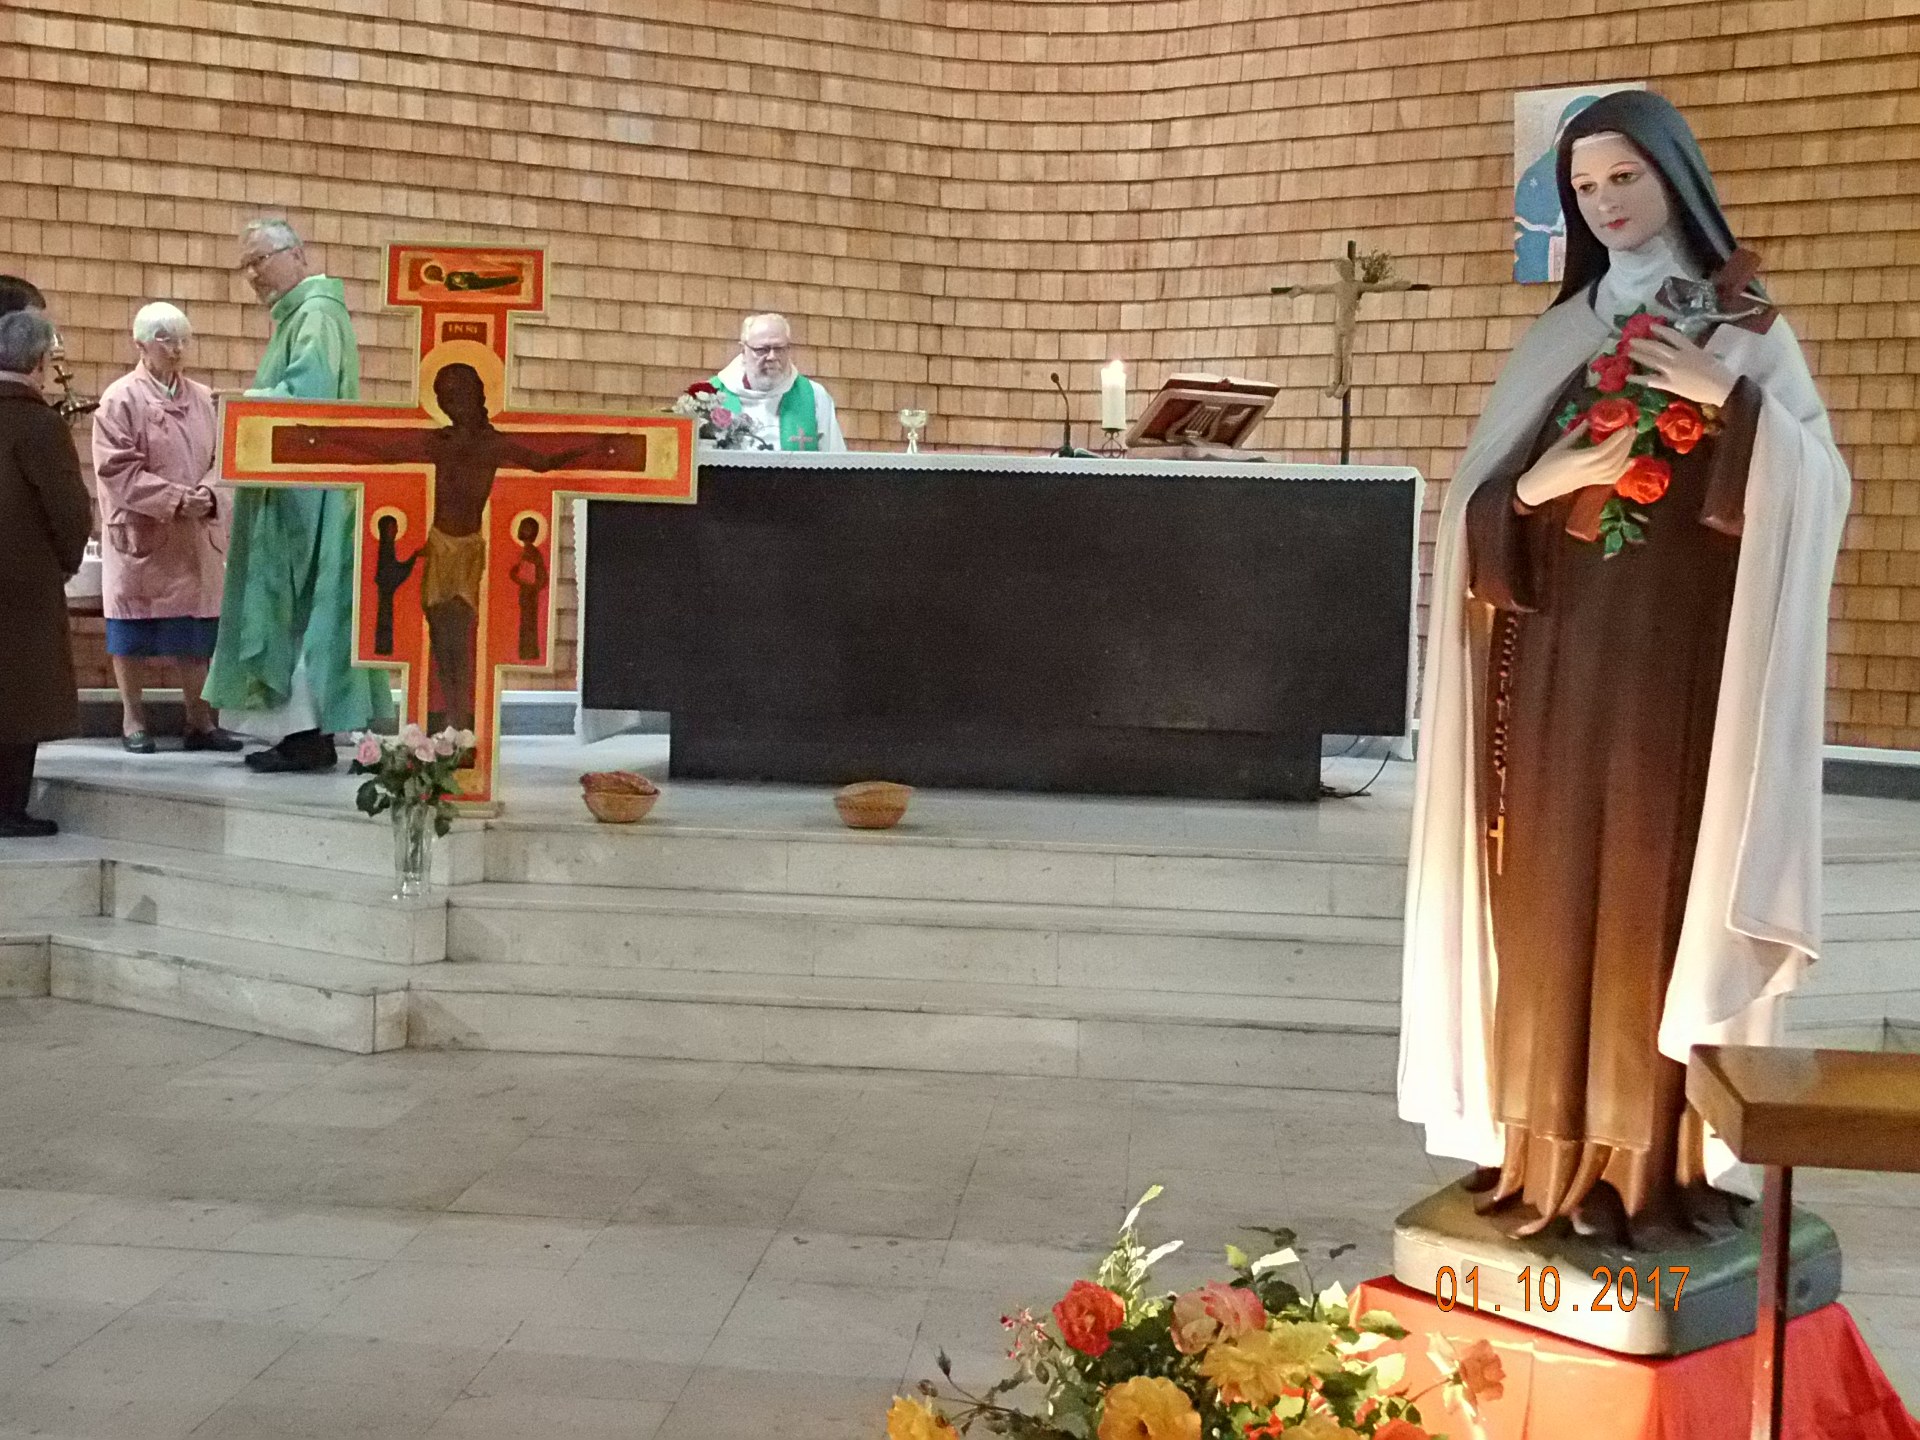 1-10-2017-Ste Therese (96)